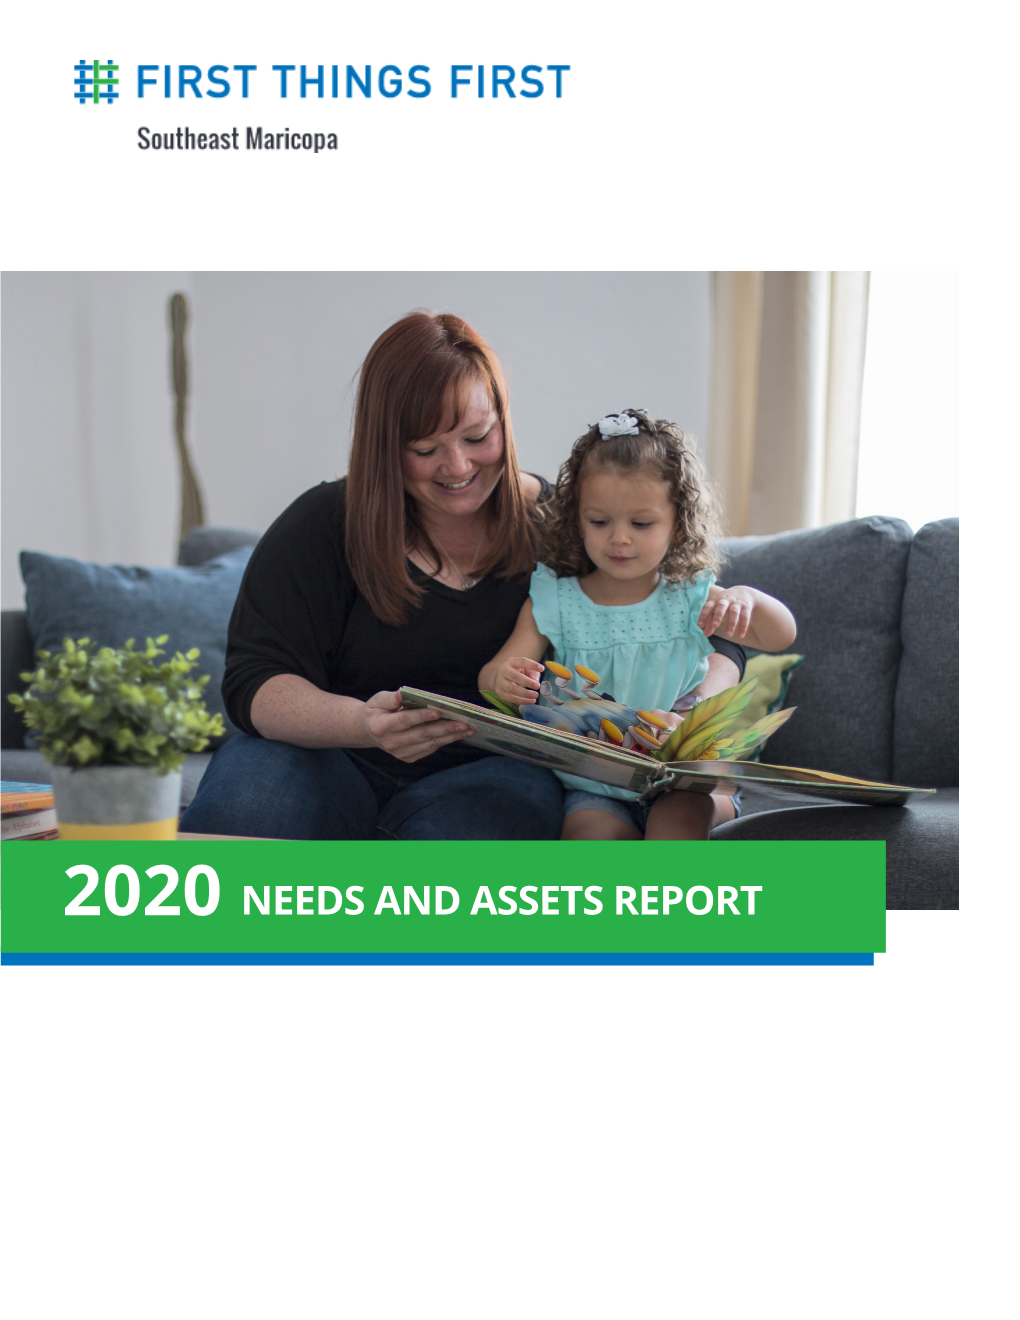 Regional Needs and Assets Report